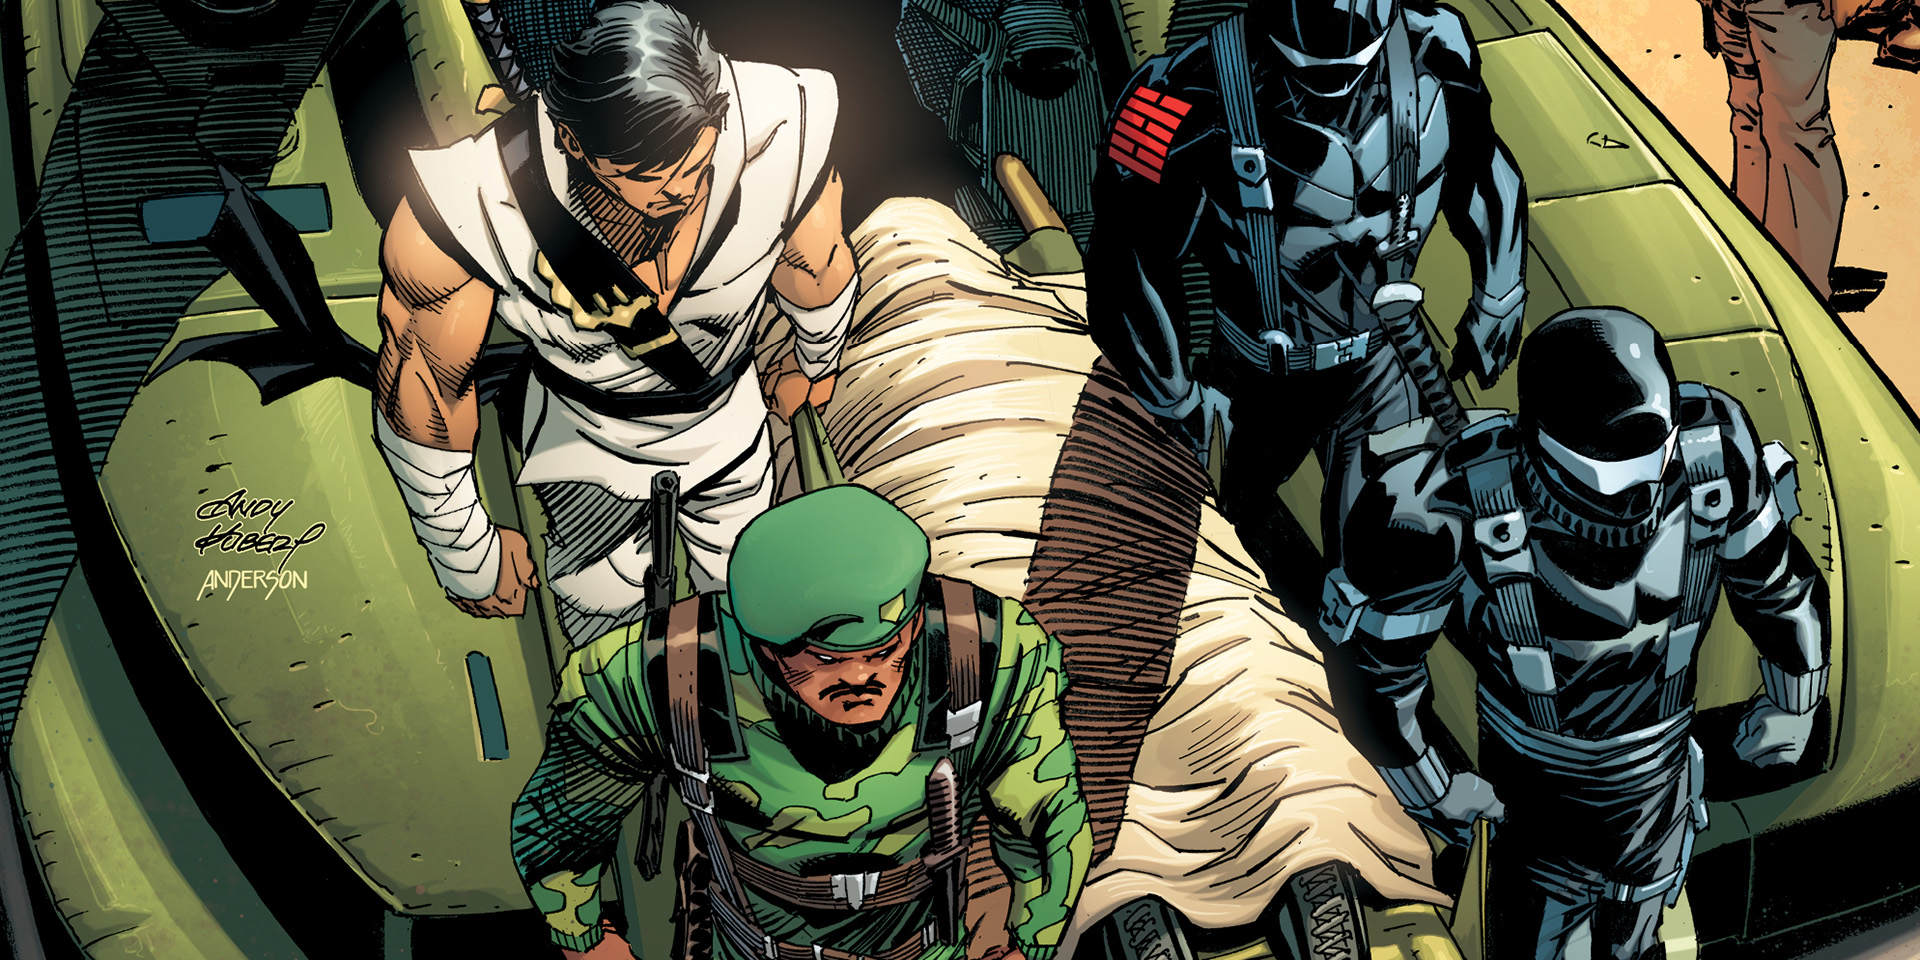 FIRST LOOK AT FUNERAL FOR A FALLEN JOE IN G.I. JOE: A REAL AMERICAN HERO #302